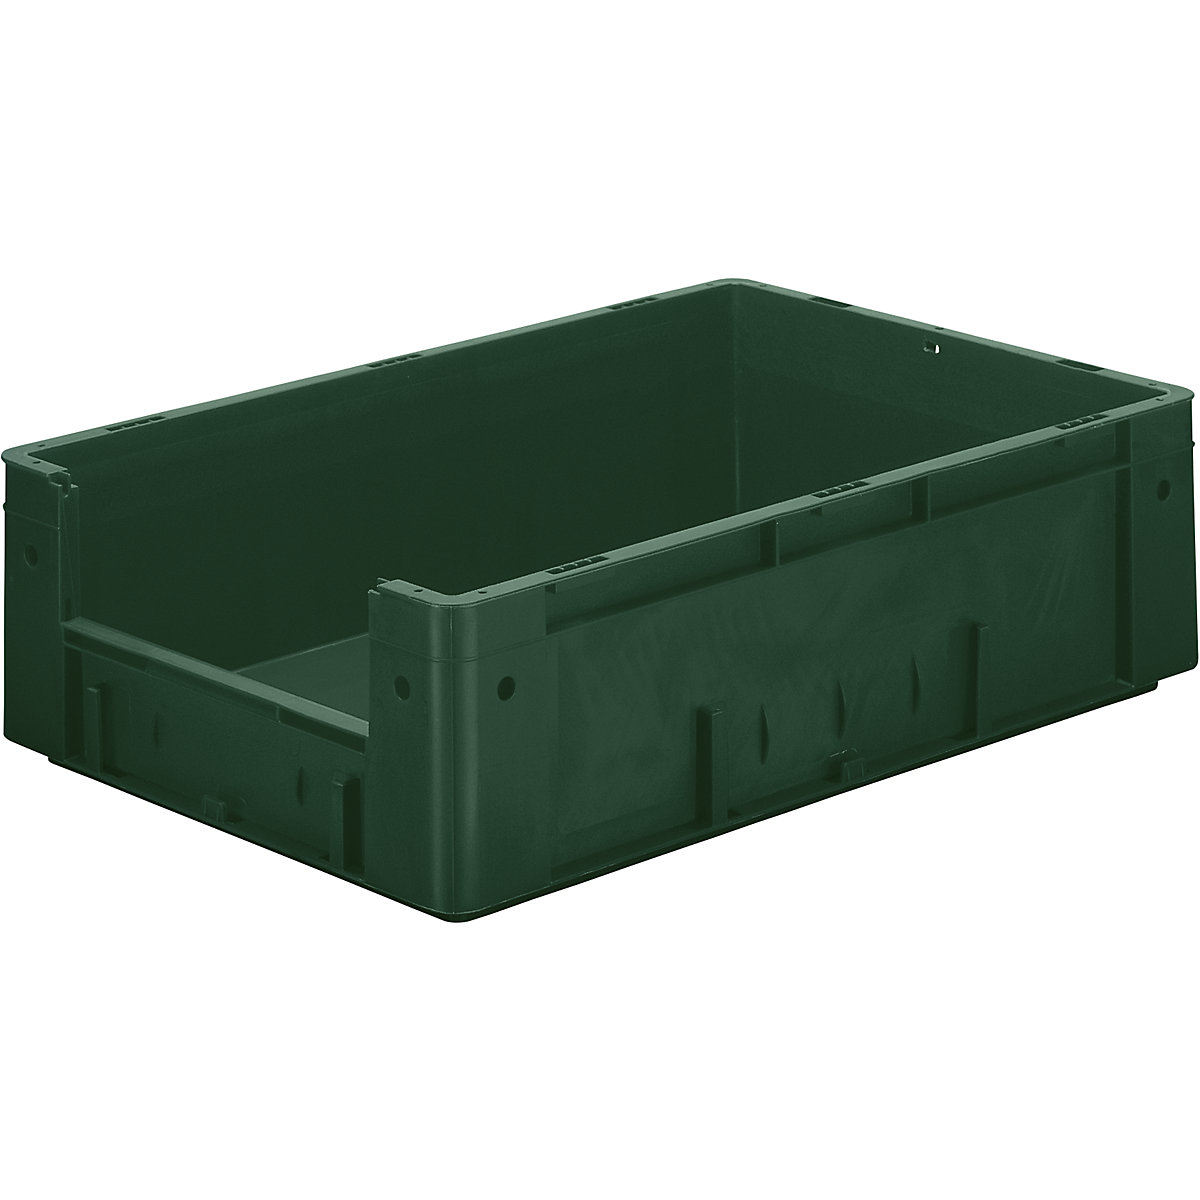 Euro stacking container, capacity 31 l, LxWxH 600 x 400 x 175 mm, pack of 2, green-5